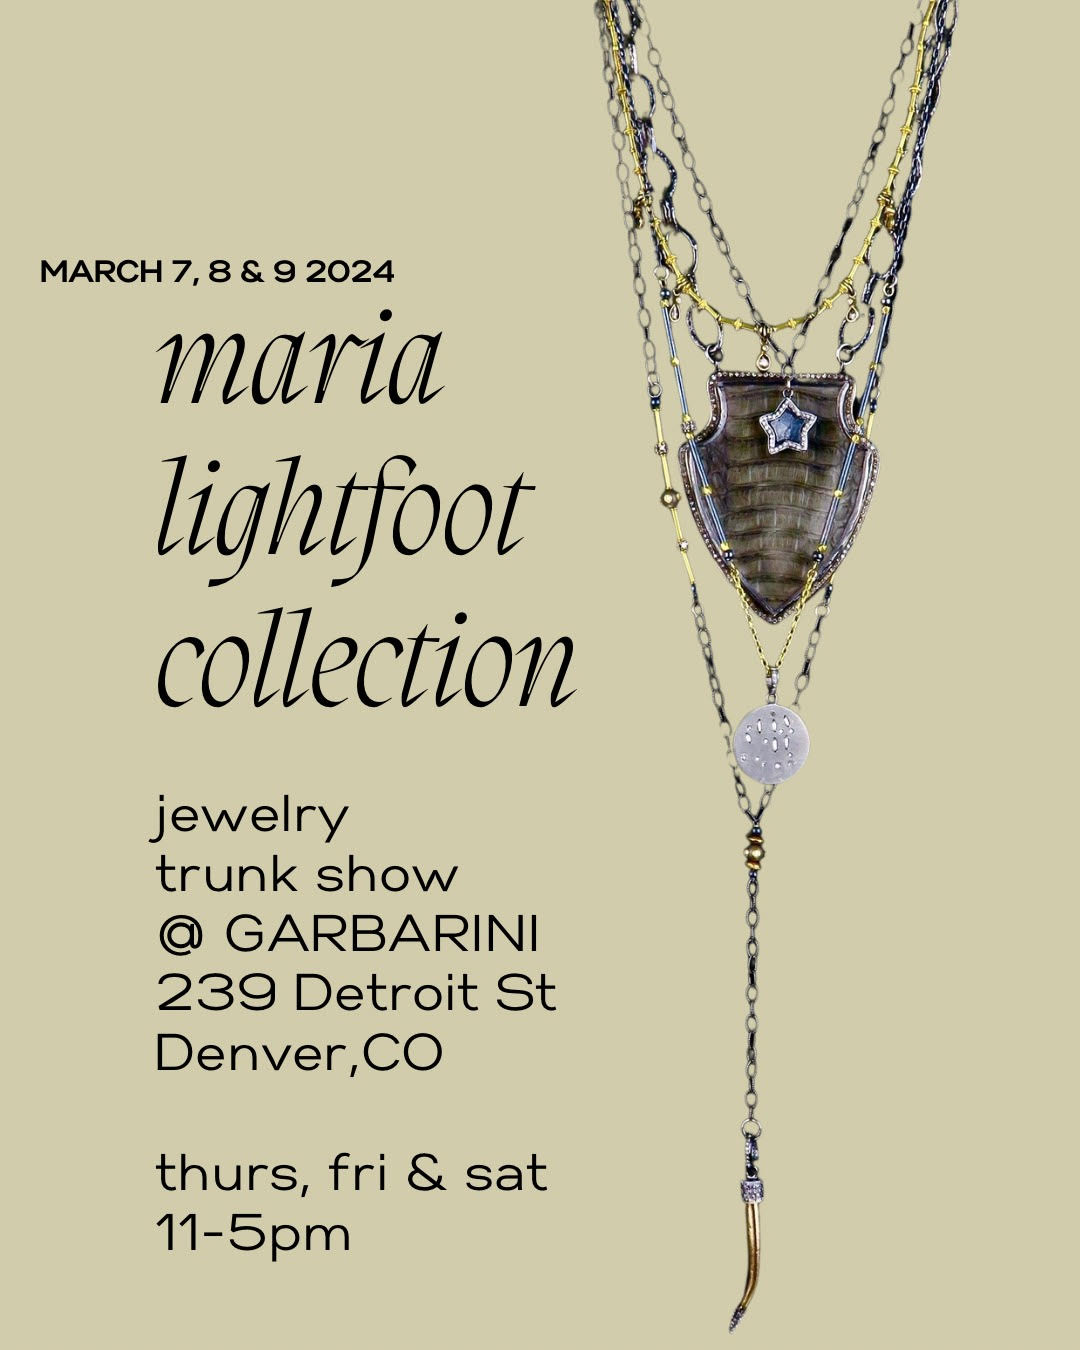 Maria Lightfoot Collection March Jewelry Trunk Show at Garbarini